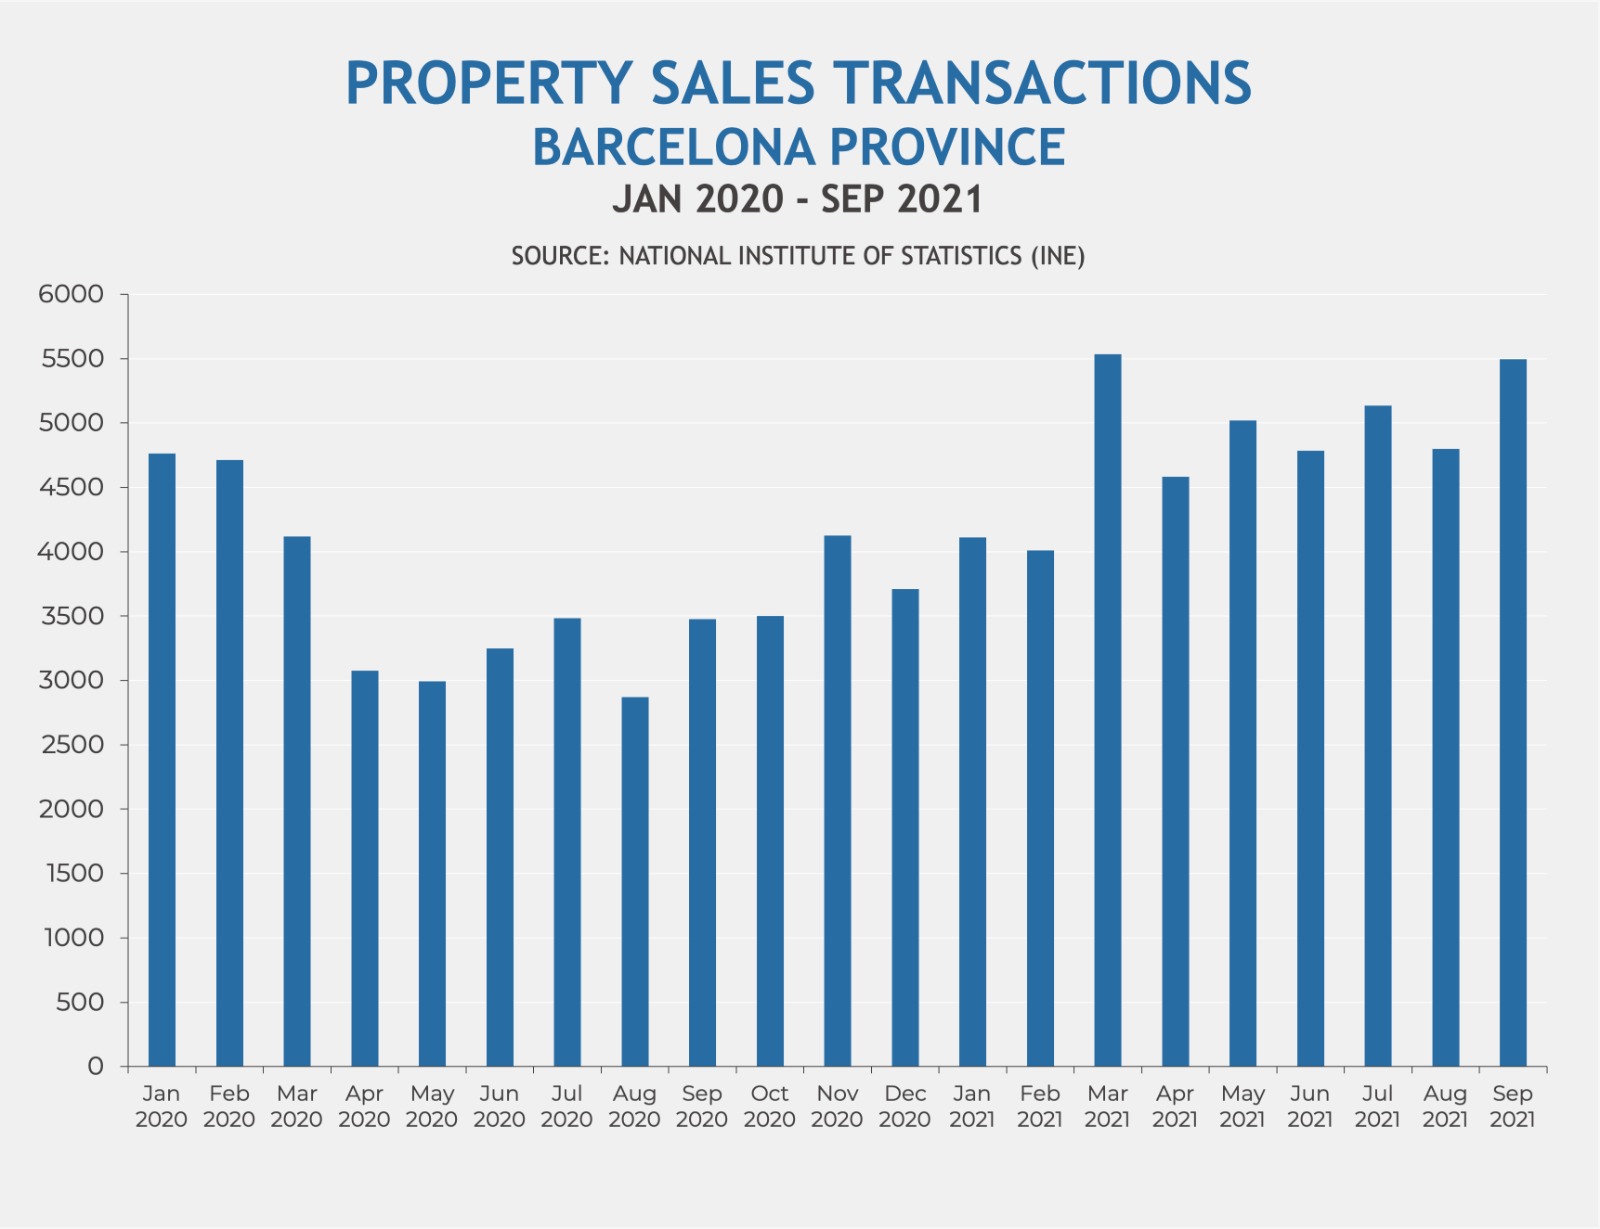 Property sales in Barcelona province